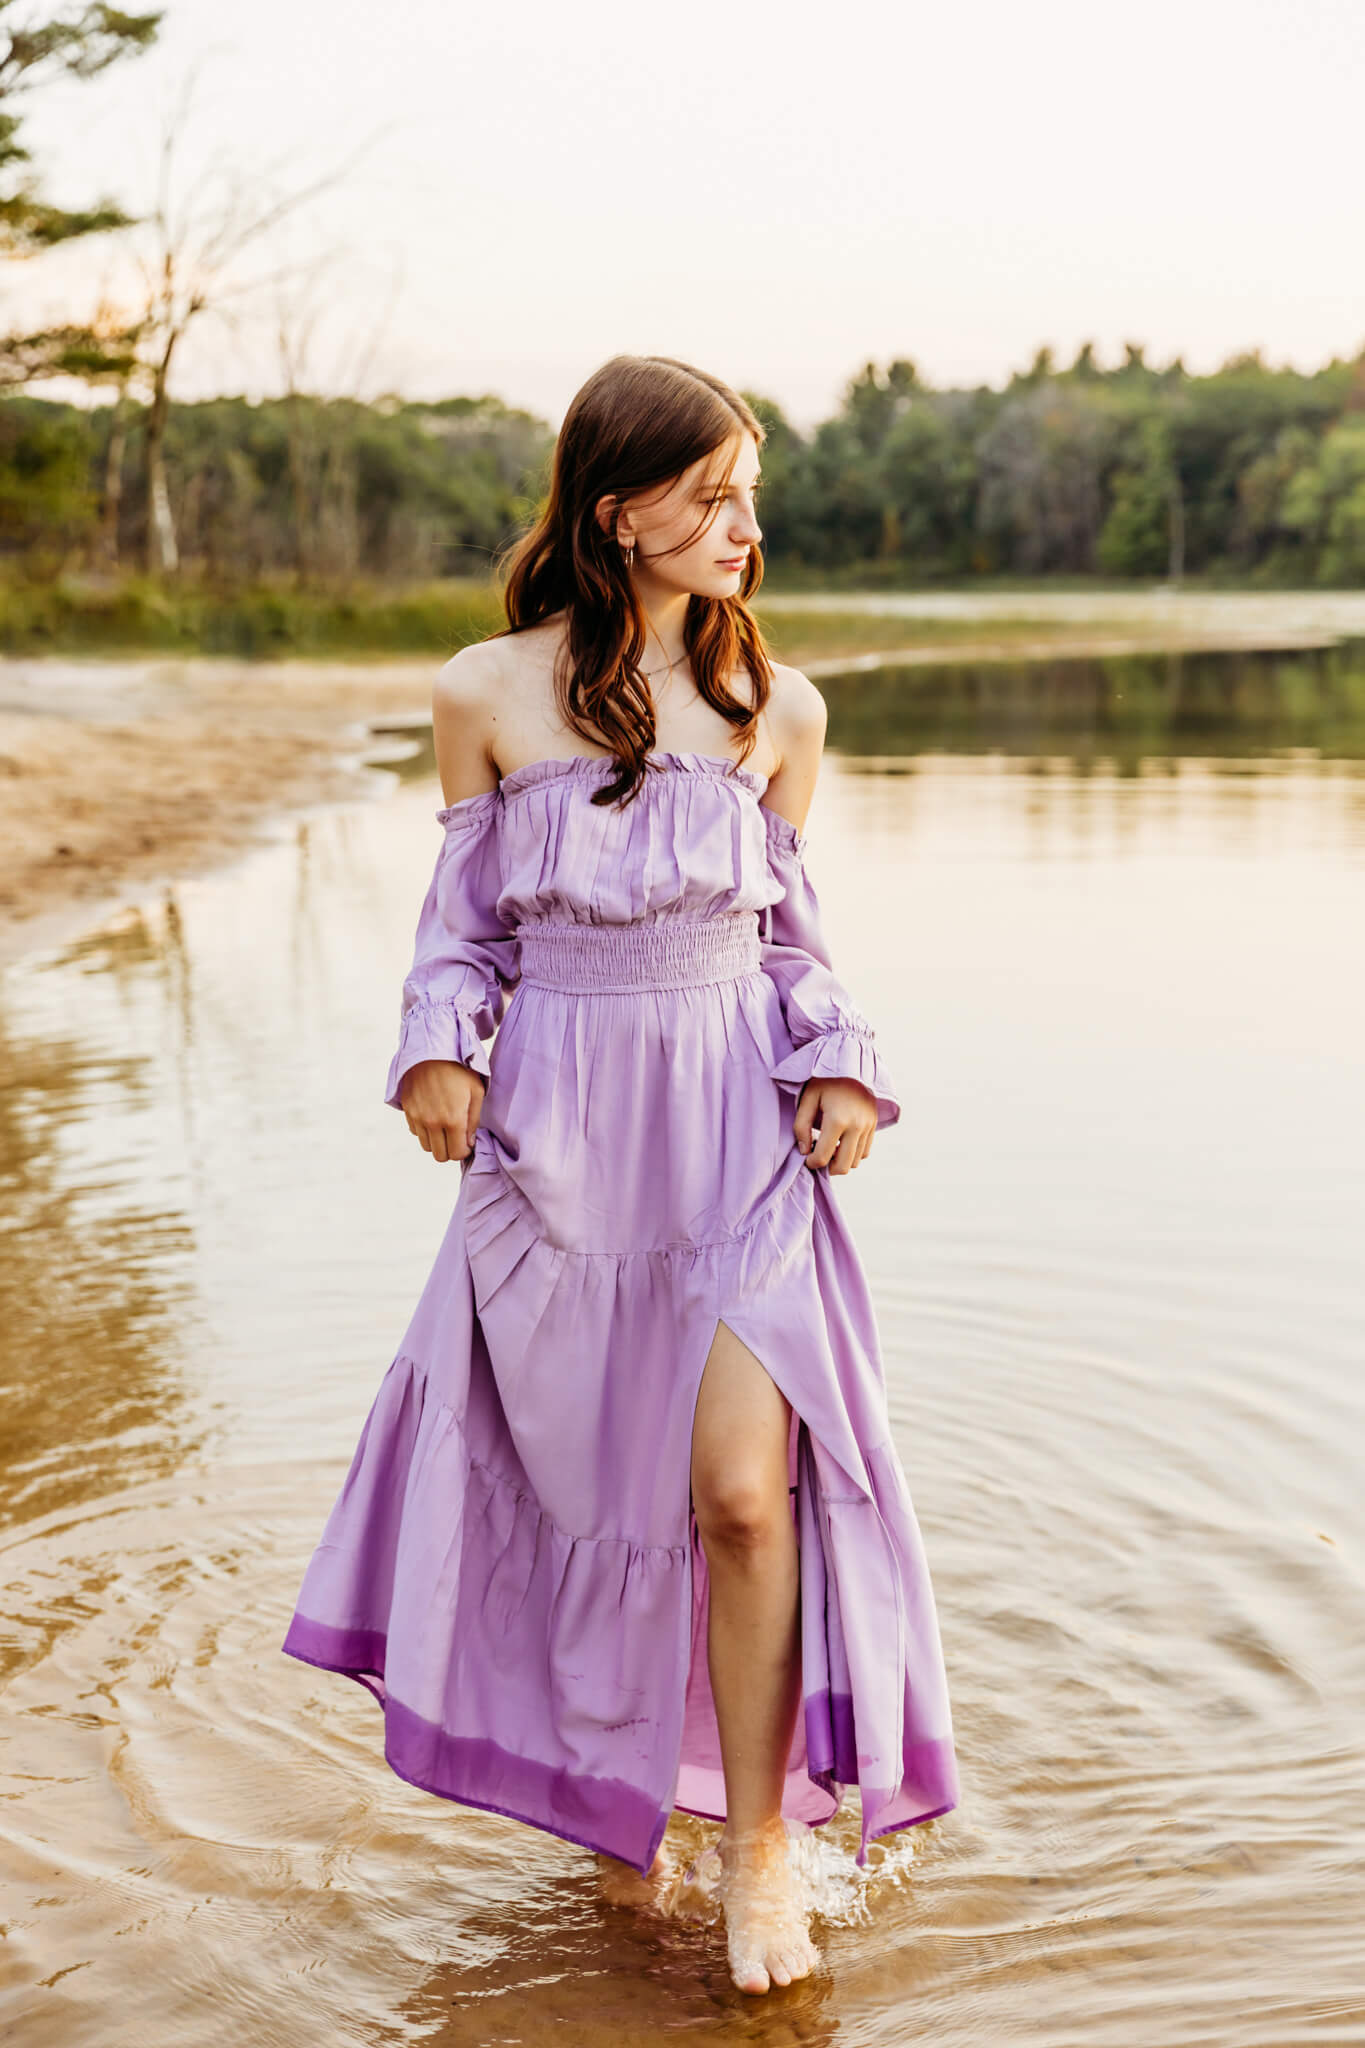 teen girl in a purple dress walking along a beach for a blog post about summer jobs in Kimberly Wi